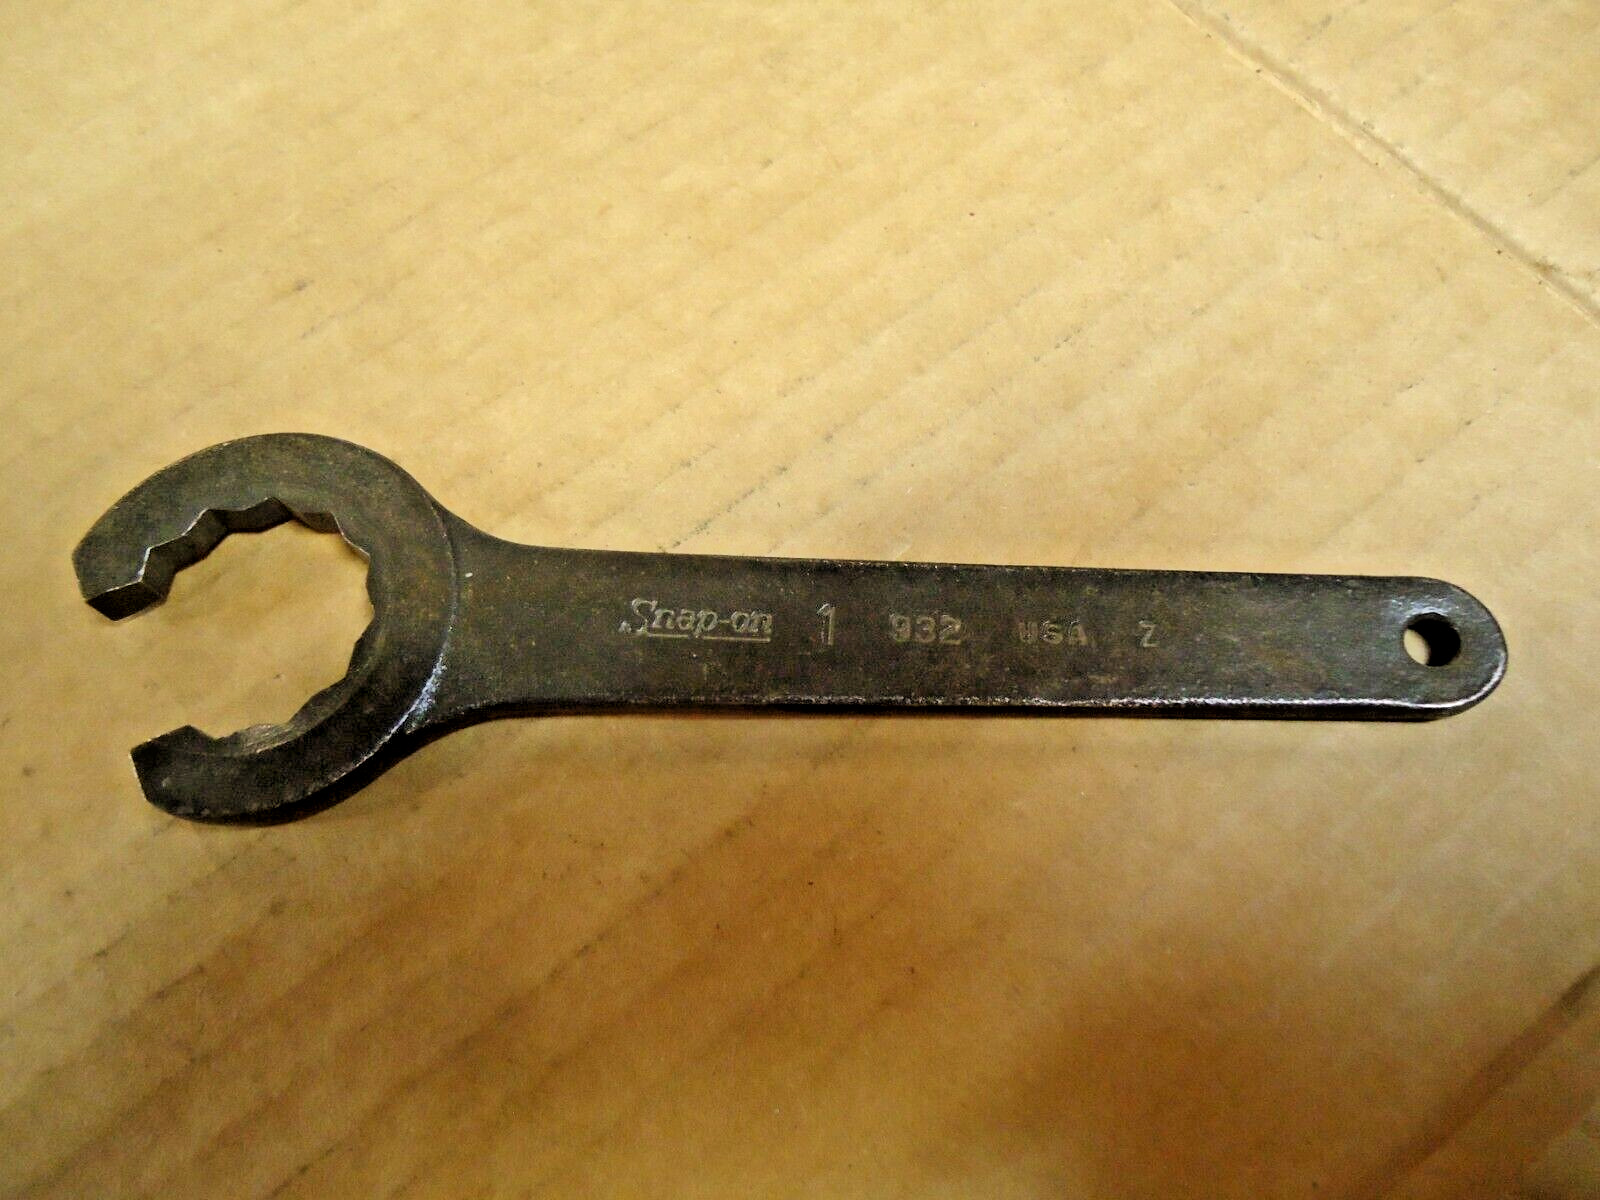 VINTAGE SNAP-ON TOOLS BOXOCKET WRENCH  No.932-1 MADE IN U.S.A  M